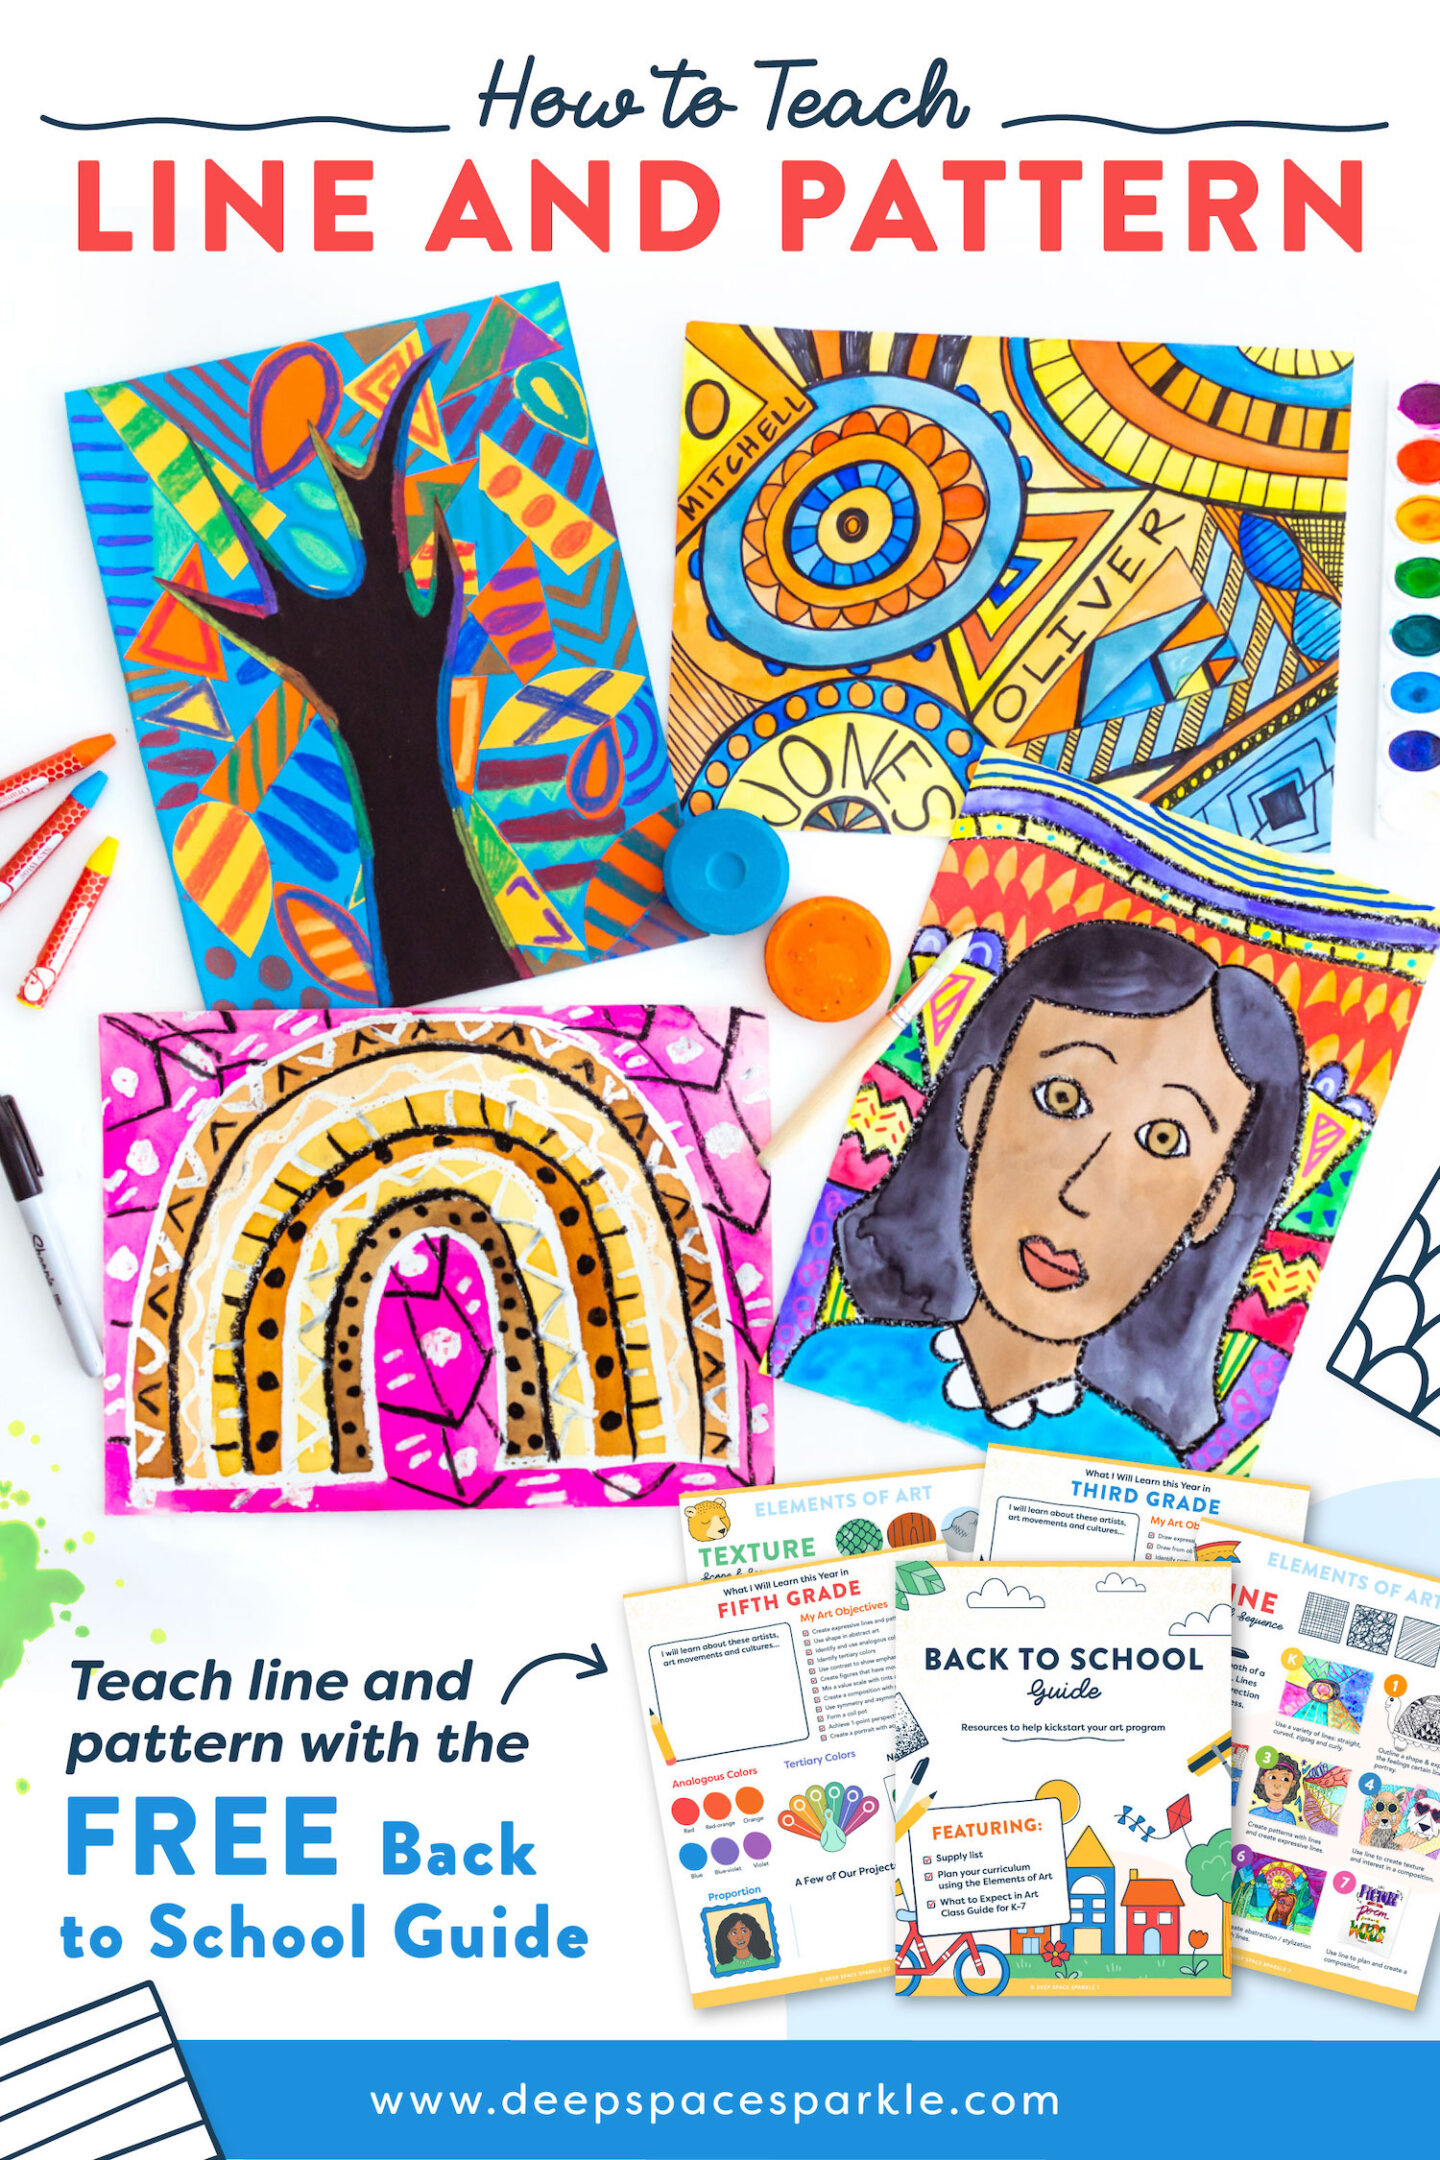 How to Teach Line and Pattern to elementary school students with free back to school guide PDF